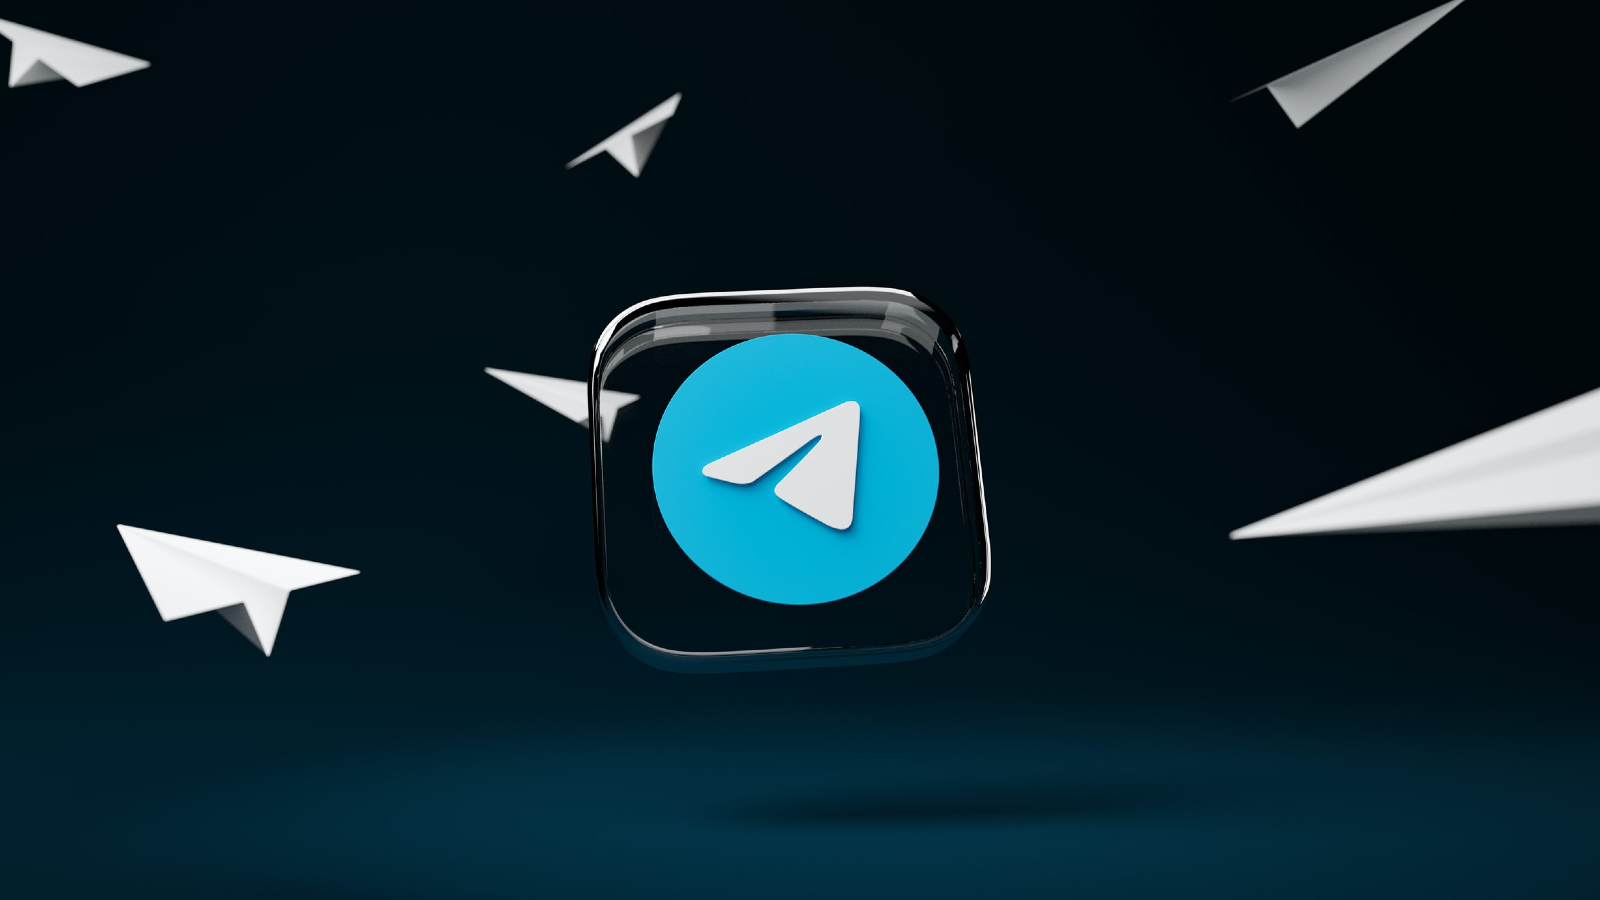 The most recent update to Telegram adds message translation in real time